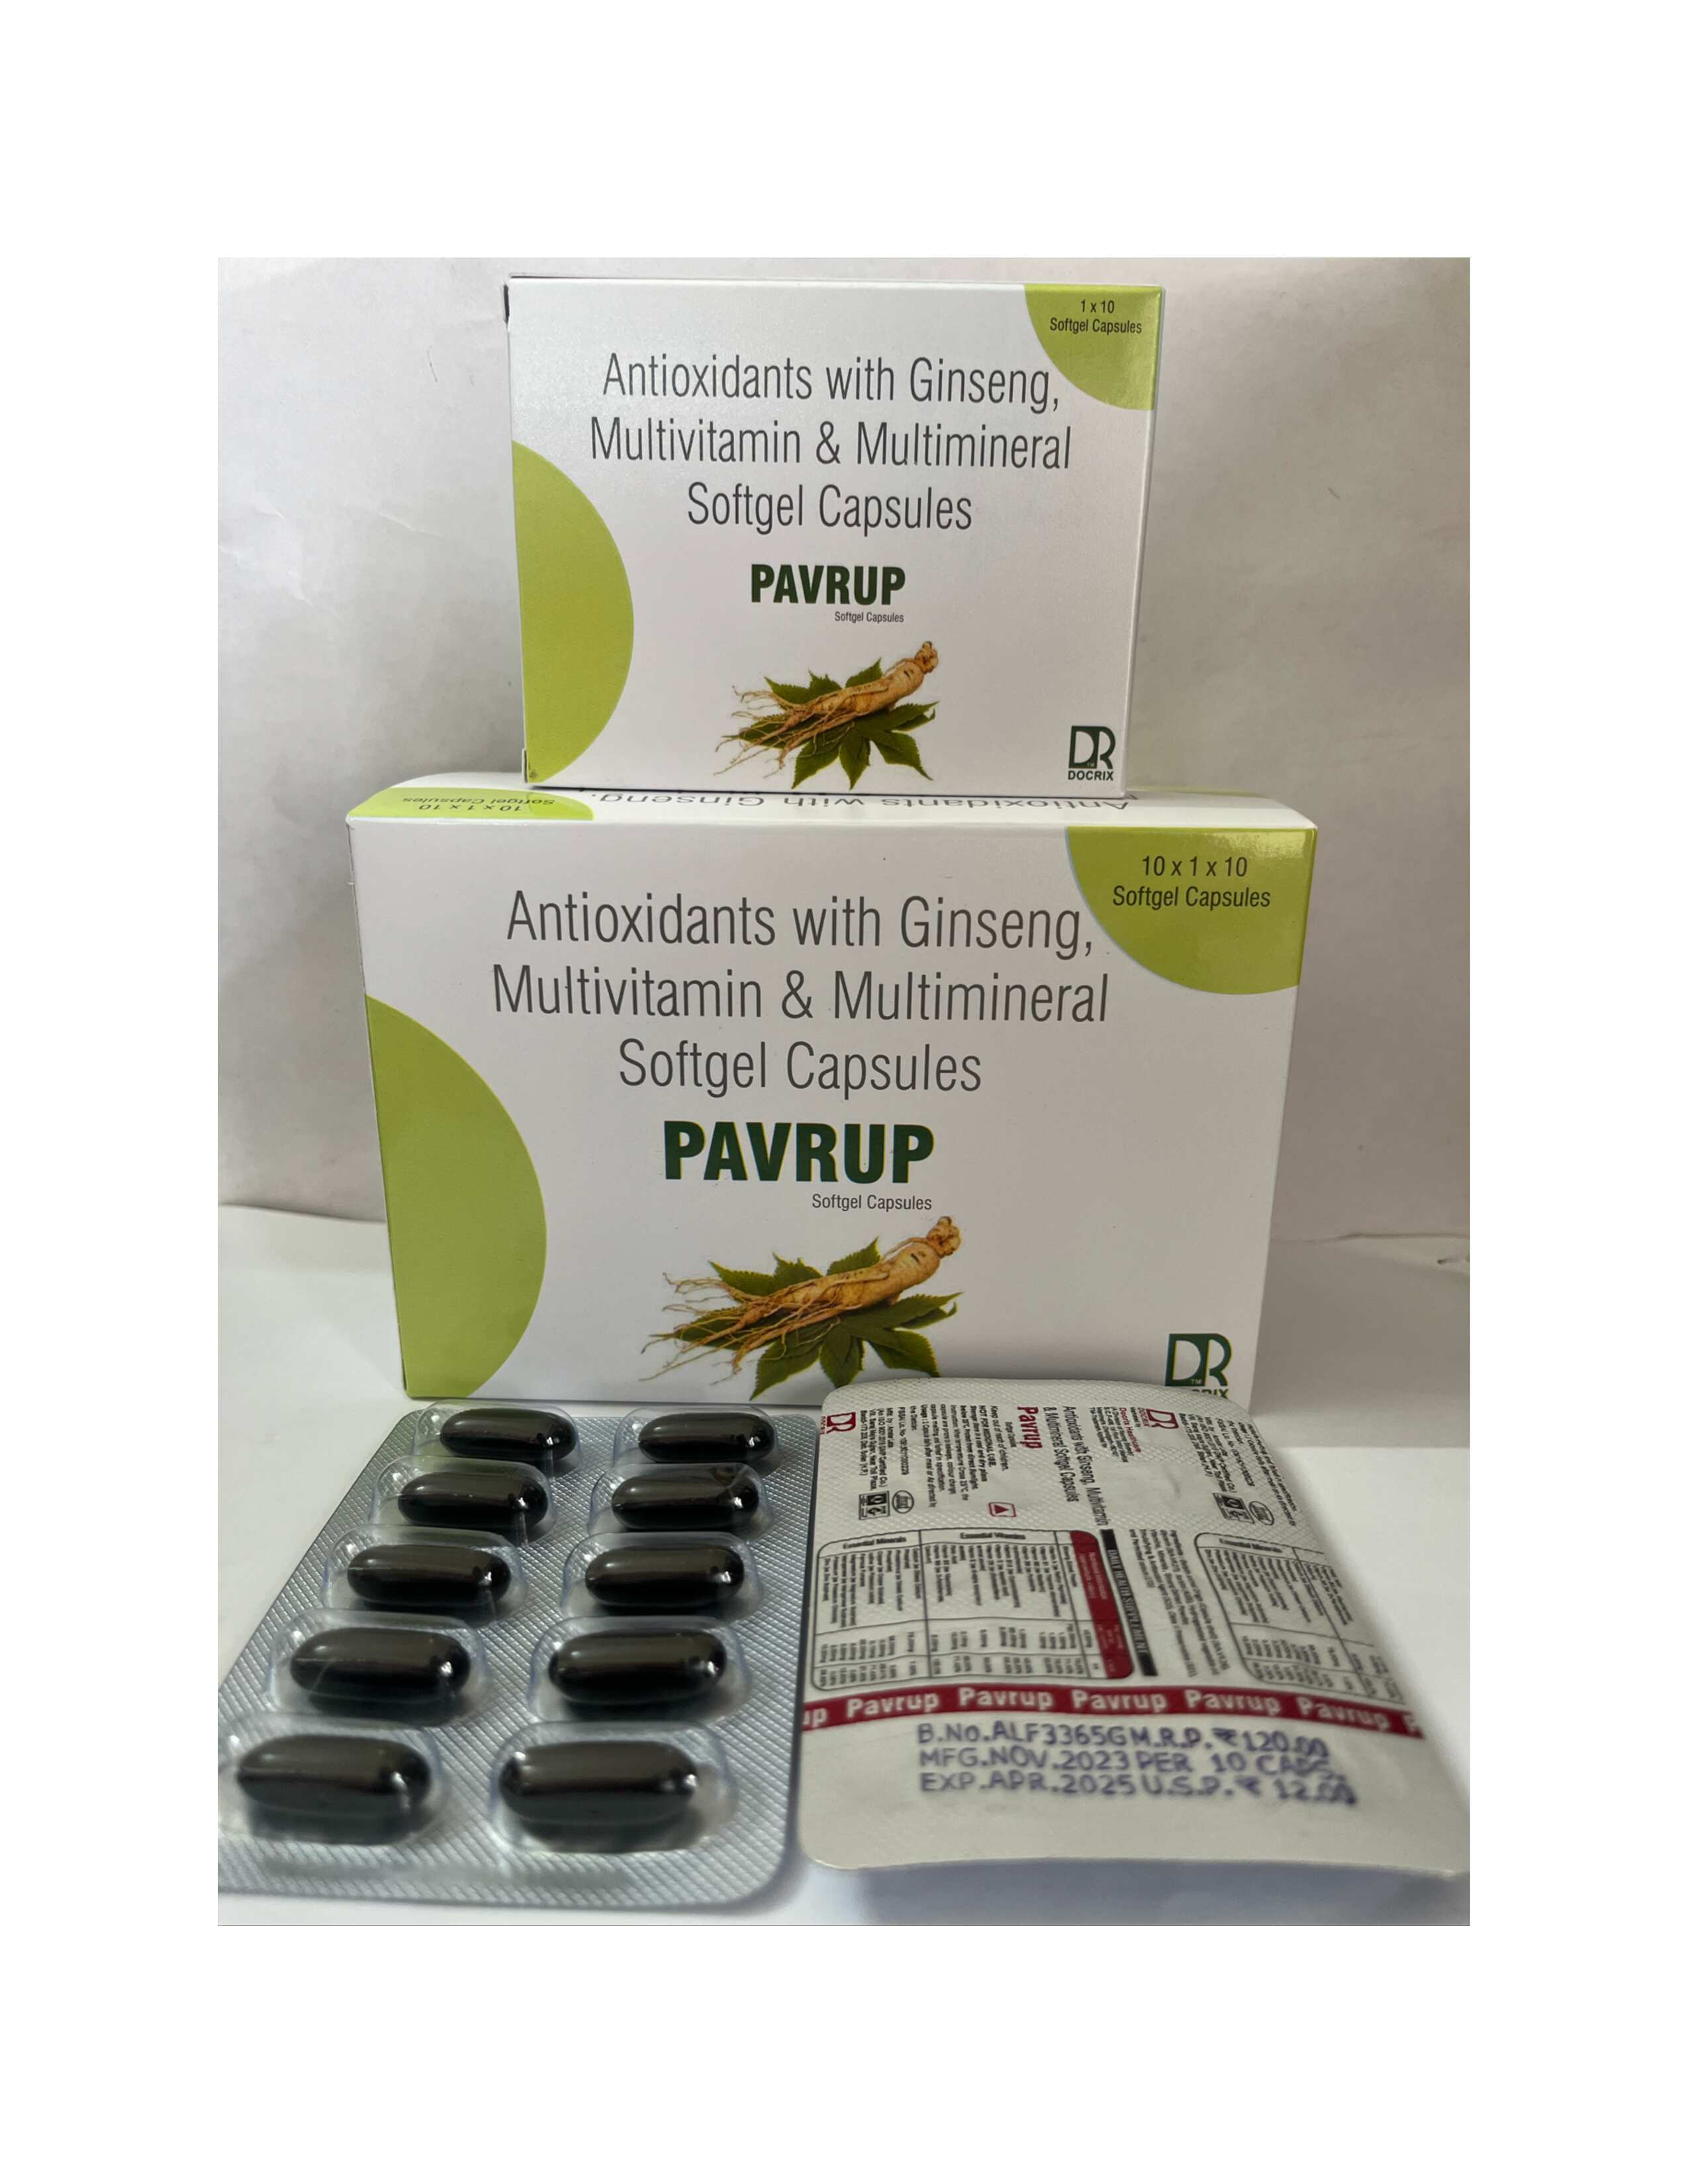 Product Name: Pavrup, Compositions of Pavrup are Antioxidants With Ginseng Multivitamin & Multimineral Softgel Capsules  - Docrix Healthcare